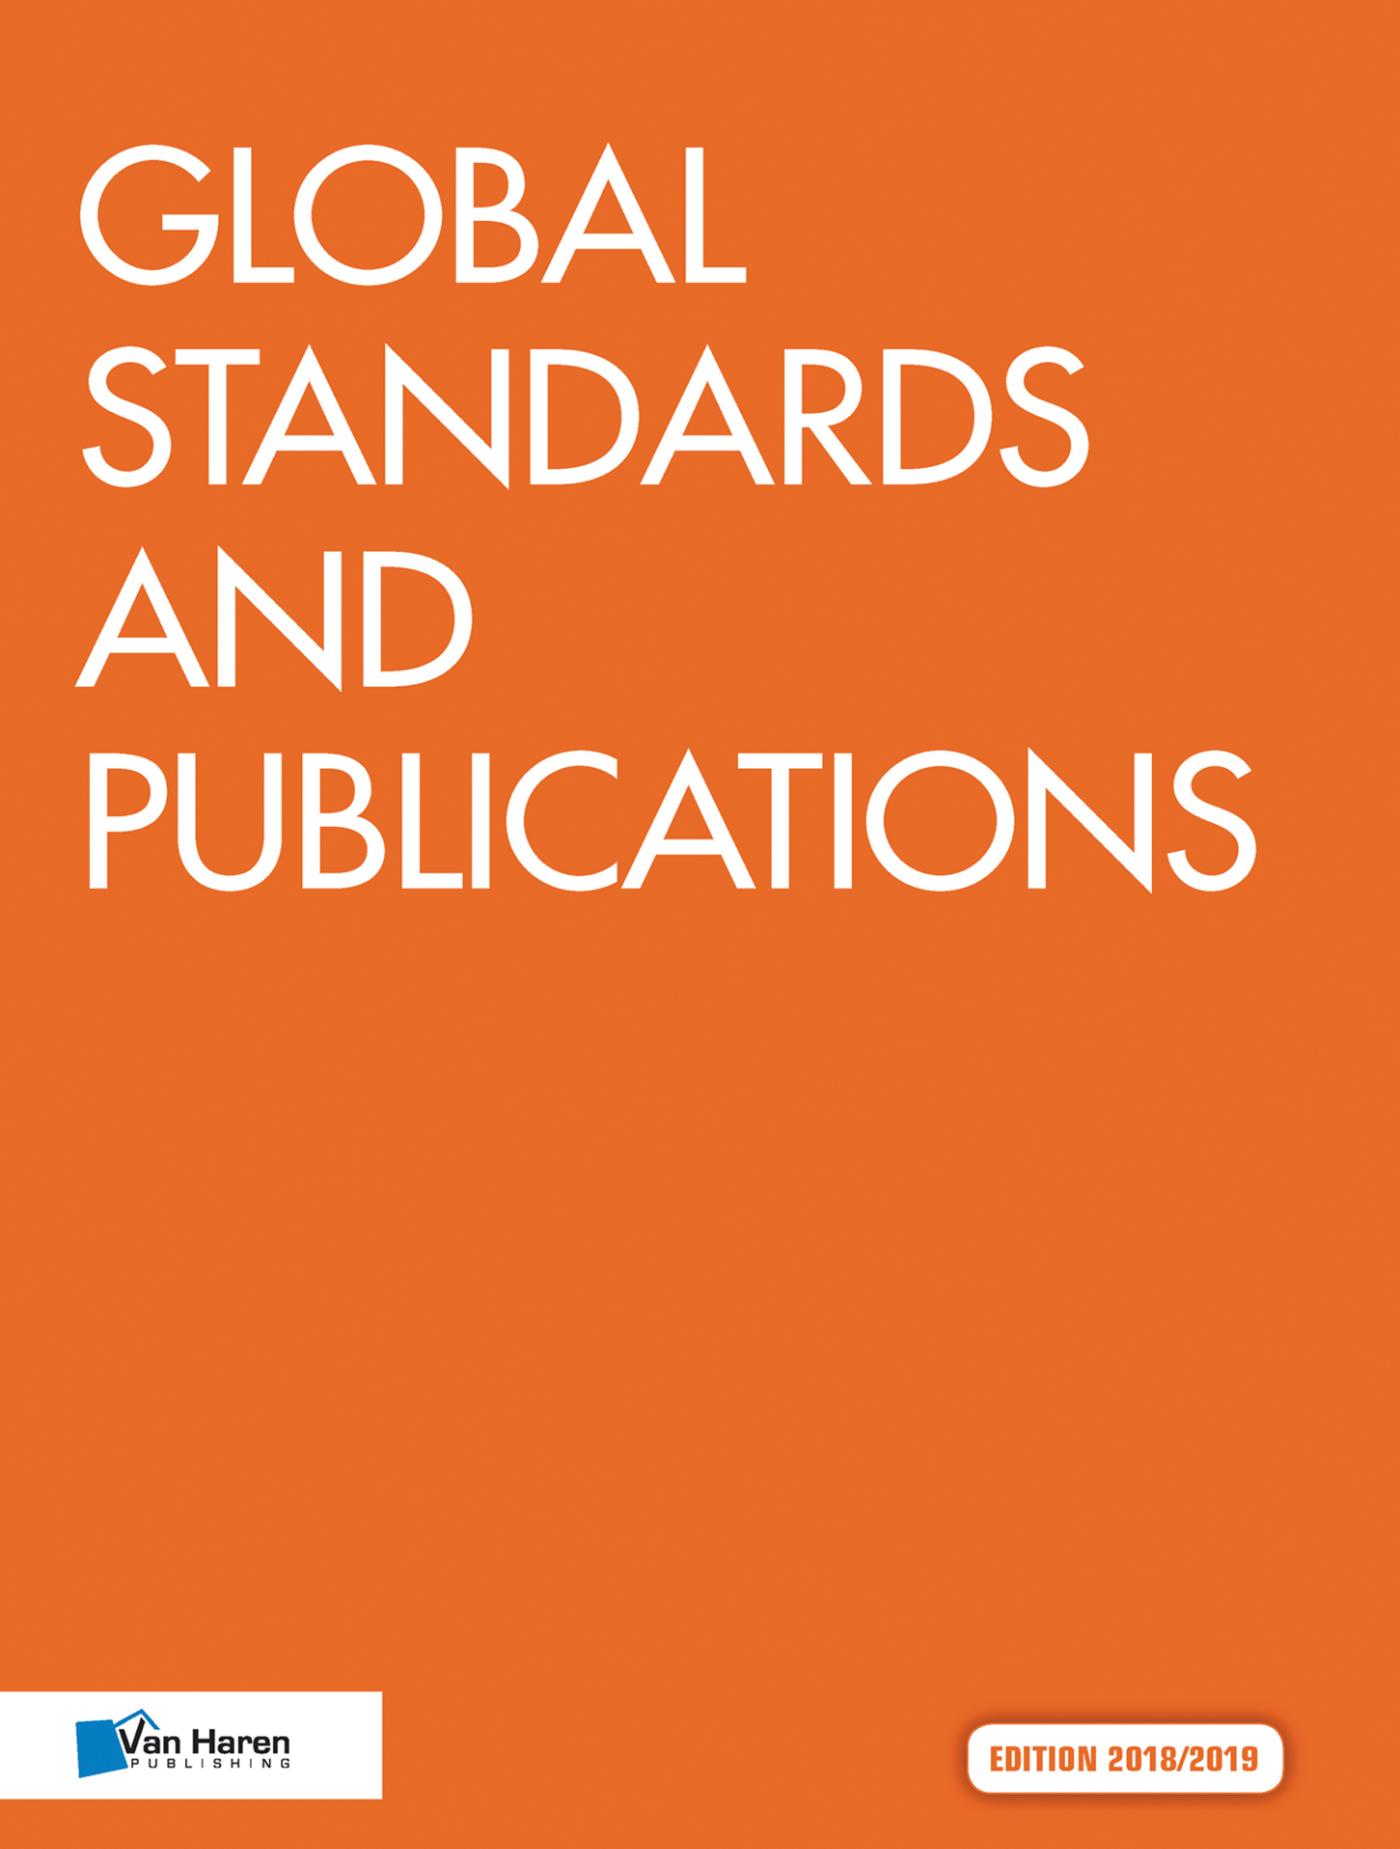 Global standards and publications / 2018/2019 (Ebook)